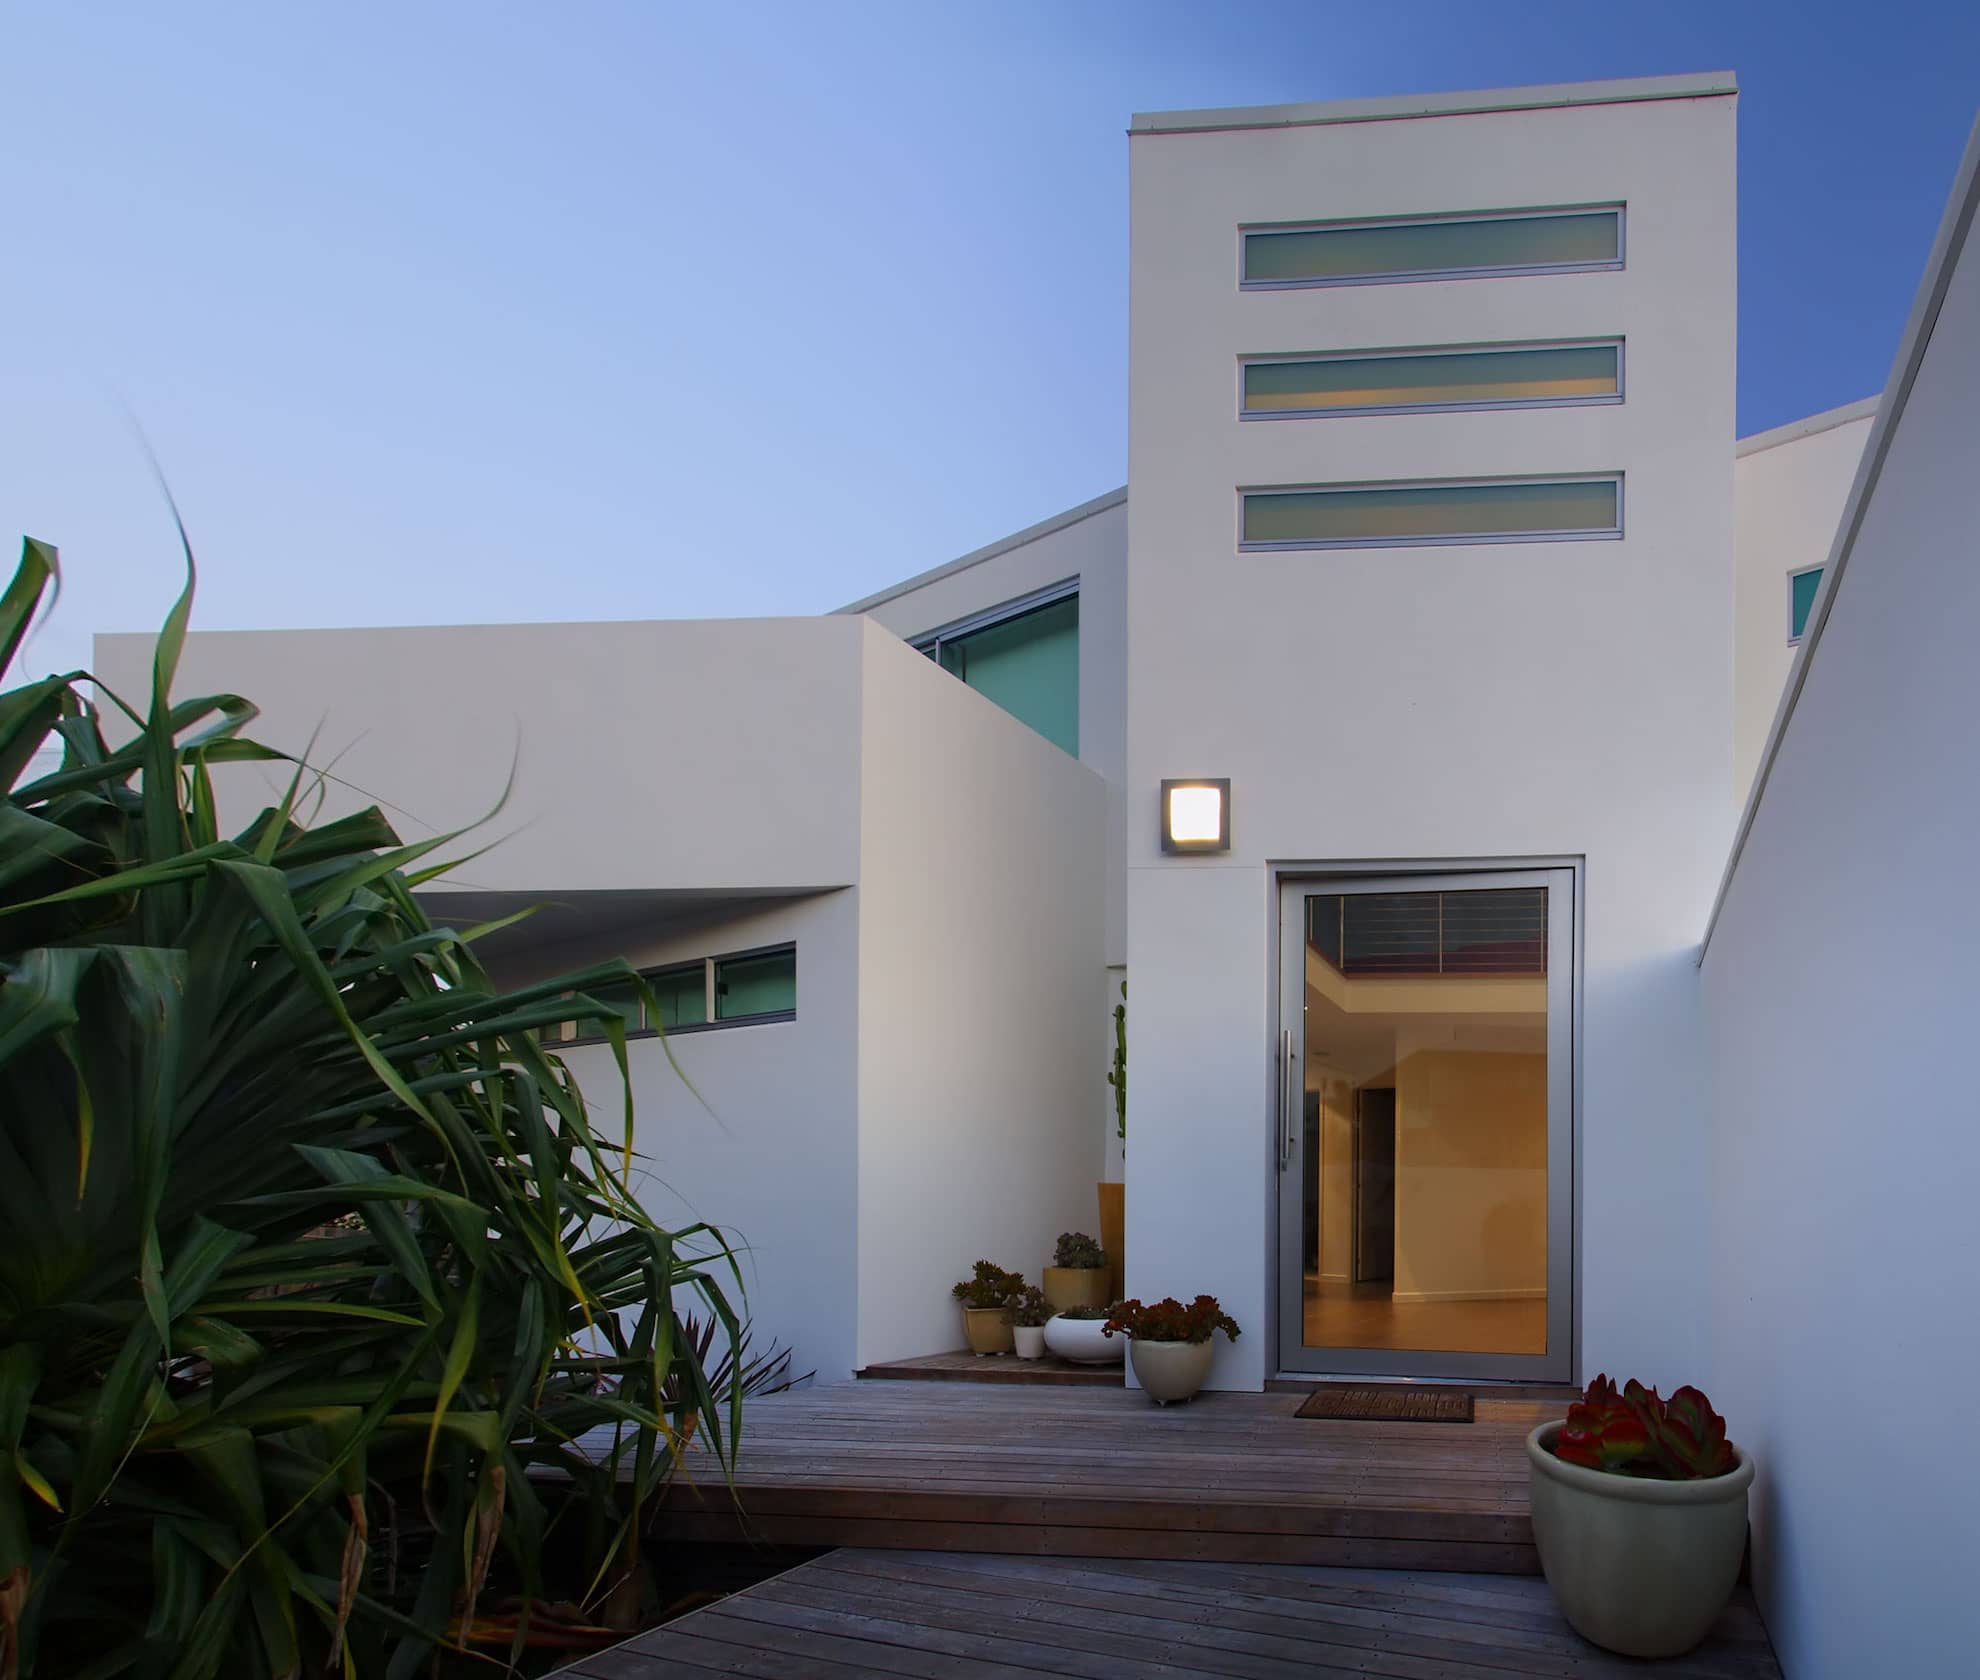 Orient Drive project by mdesign, a building design practice that operates on the Sunshine Coast.